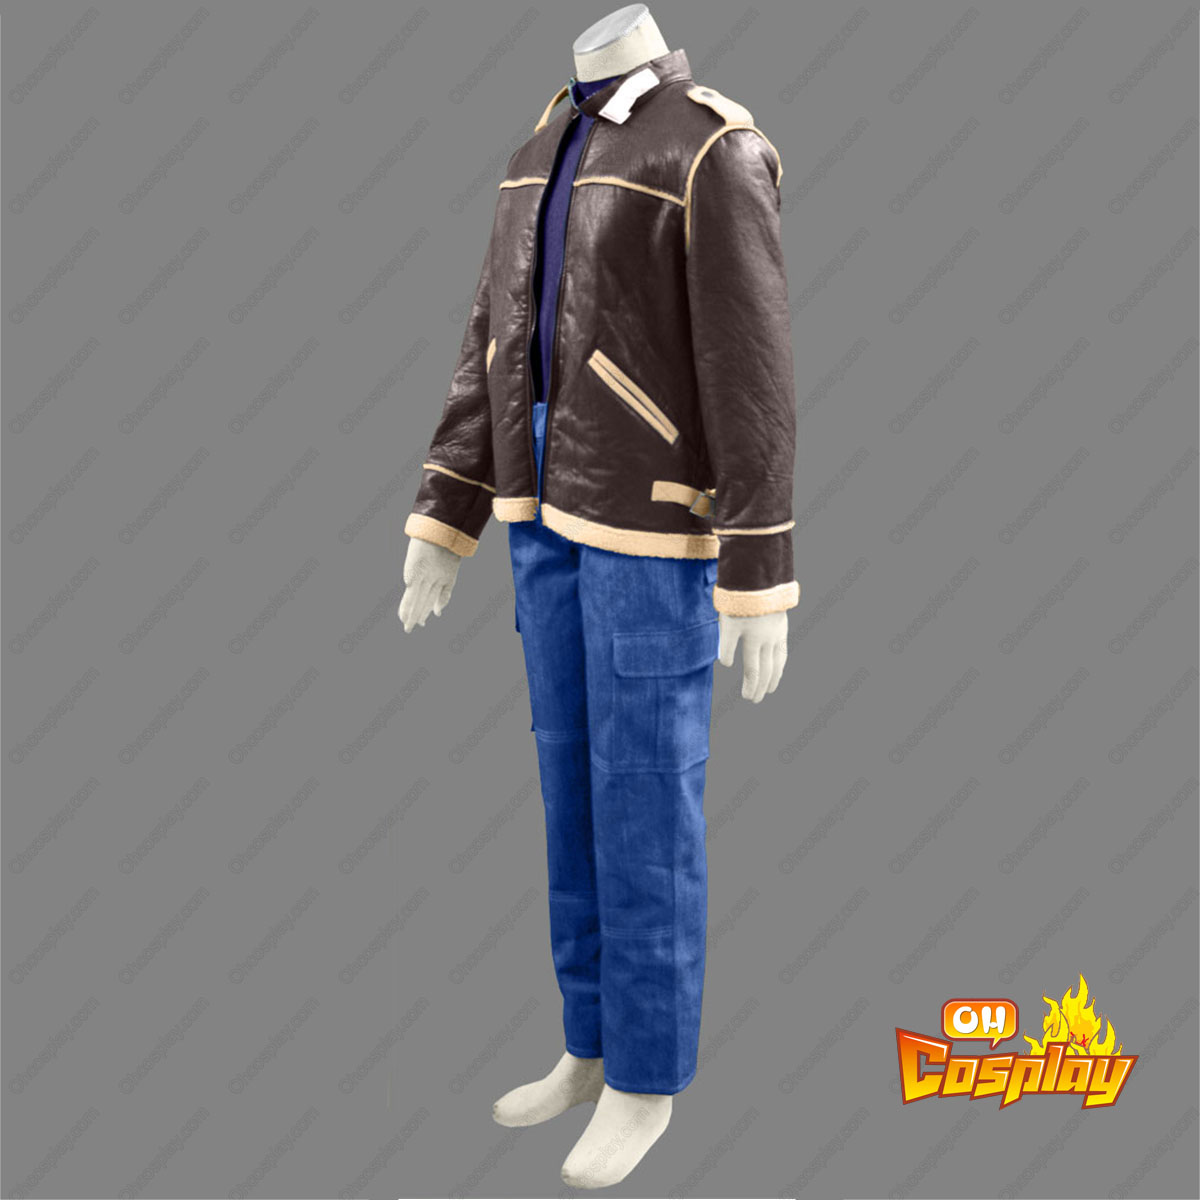 Resident Evil 4 Leon S. Kennedy Cosplay Costume Deluxe Edition